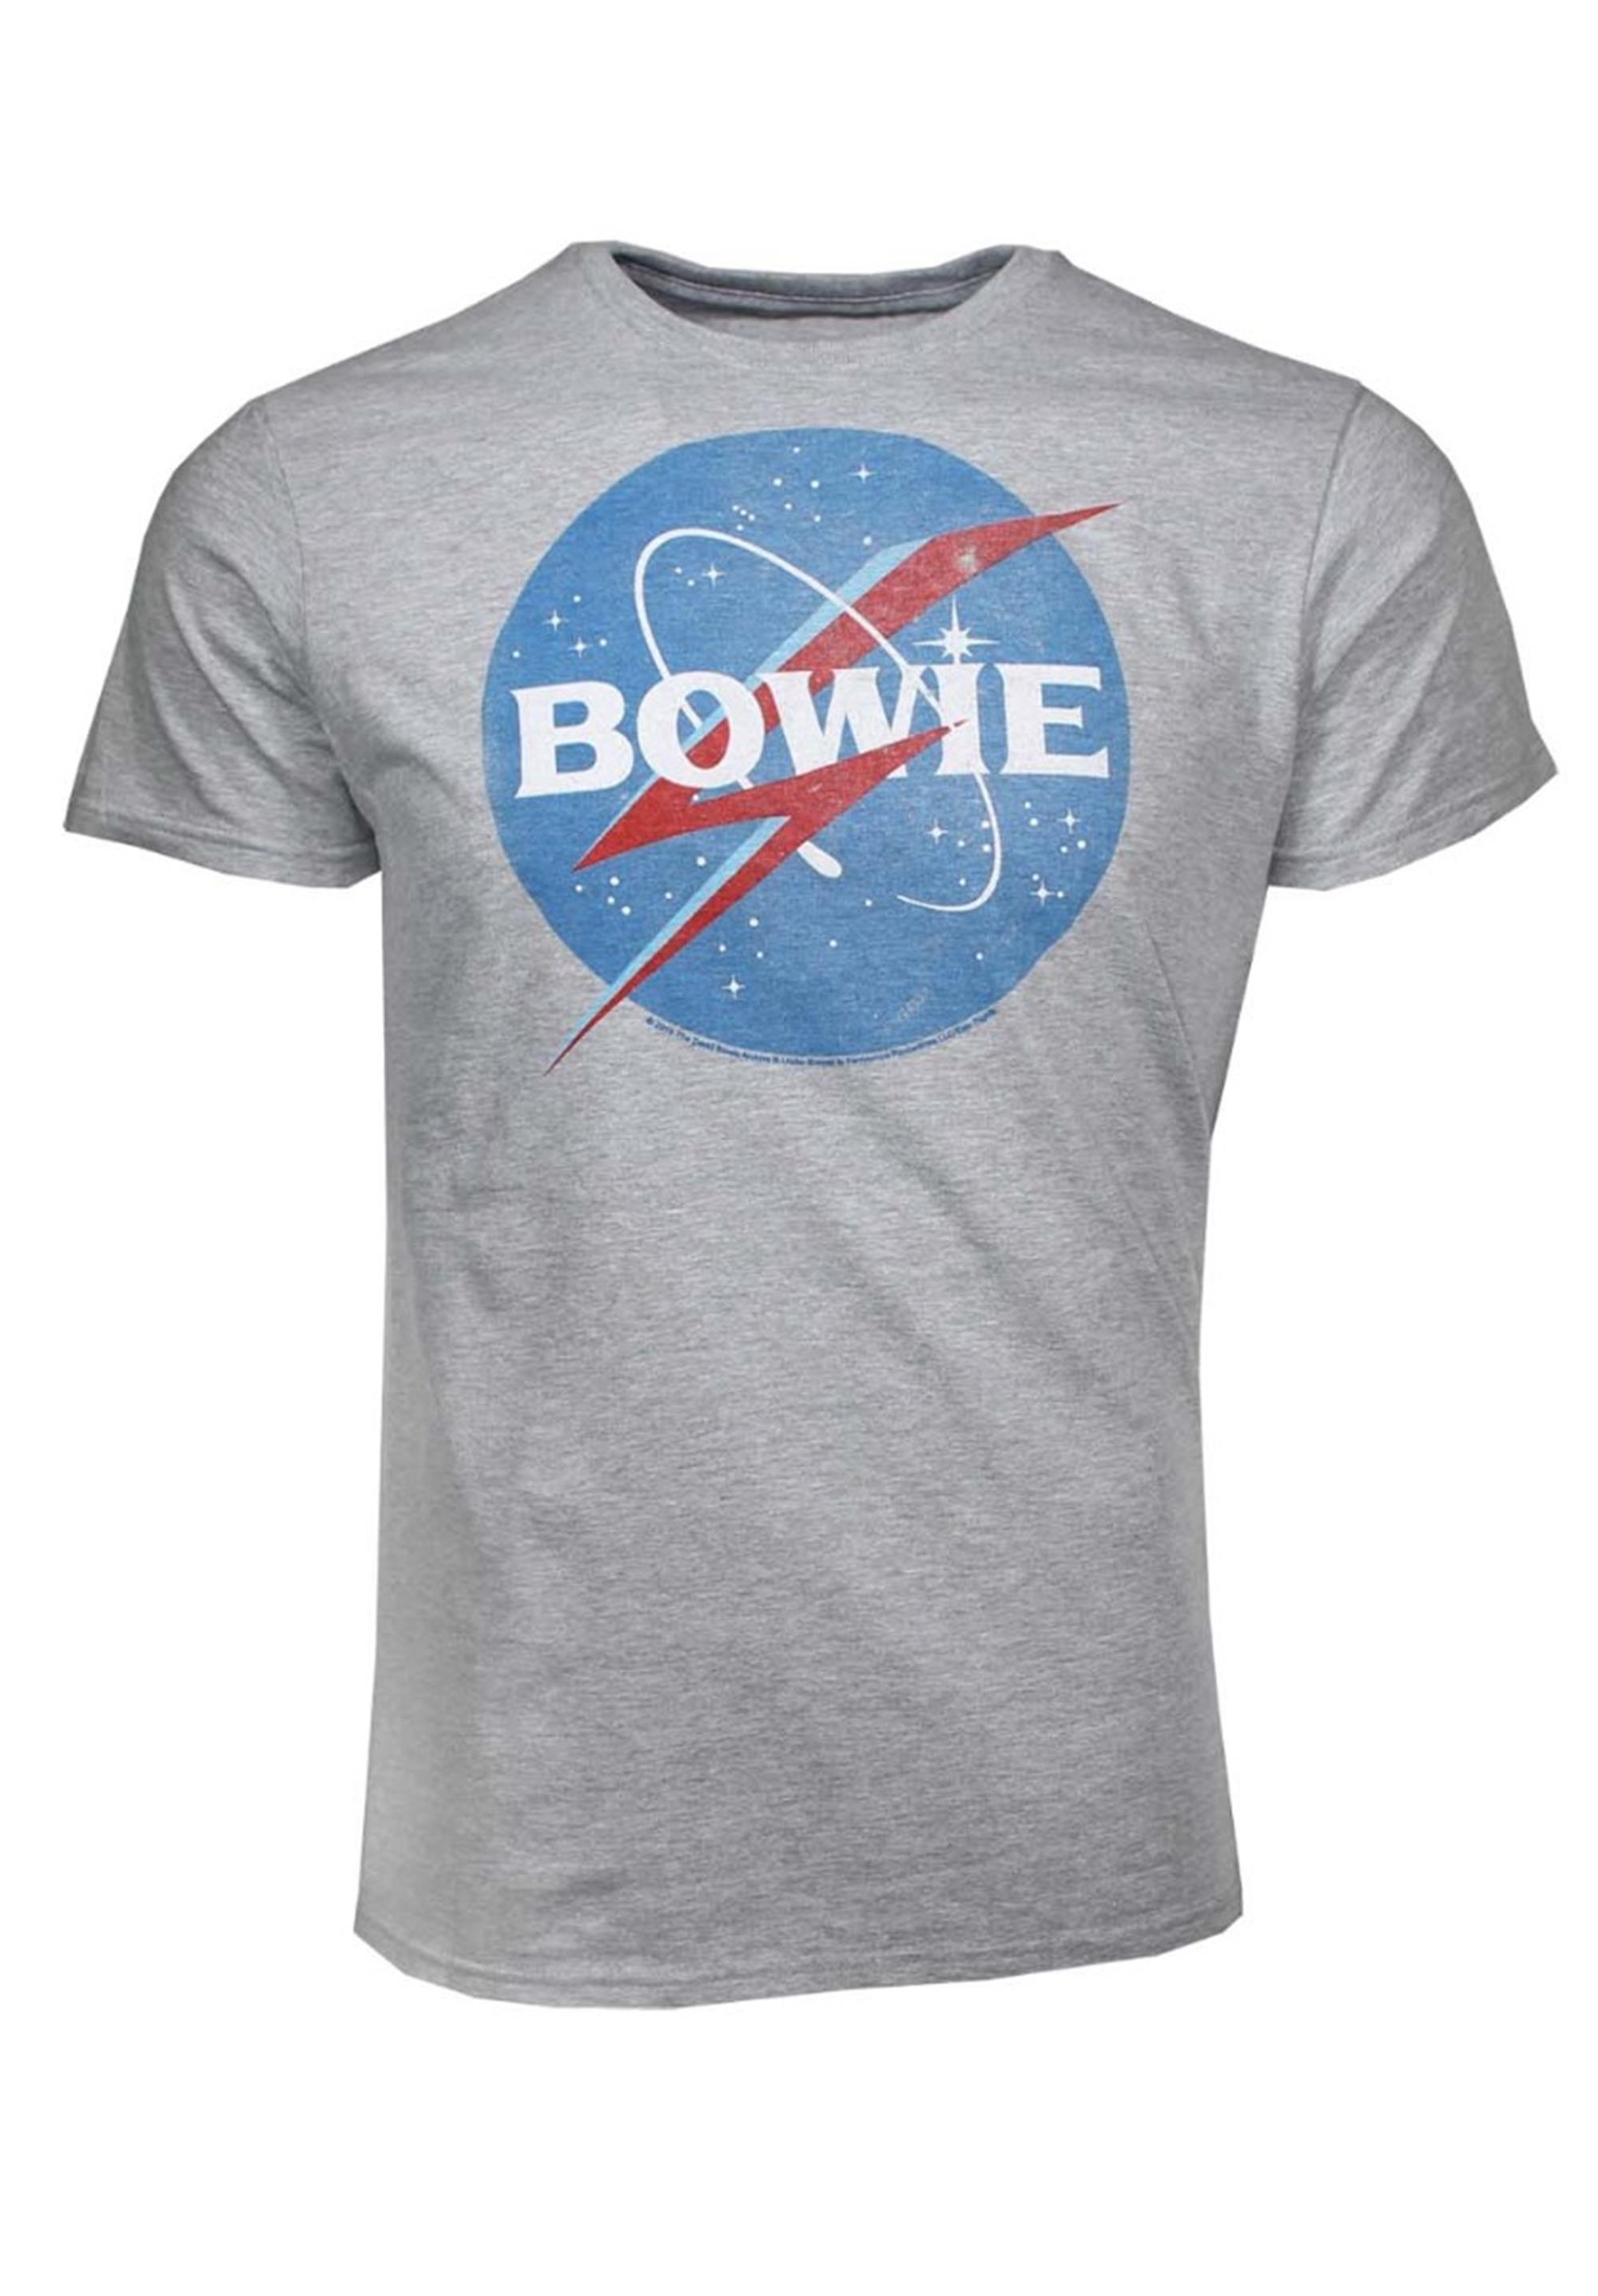 David Bowie In Space T-Shirt